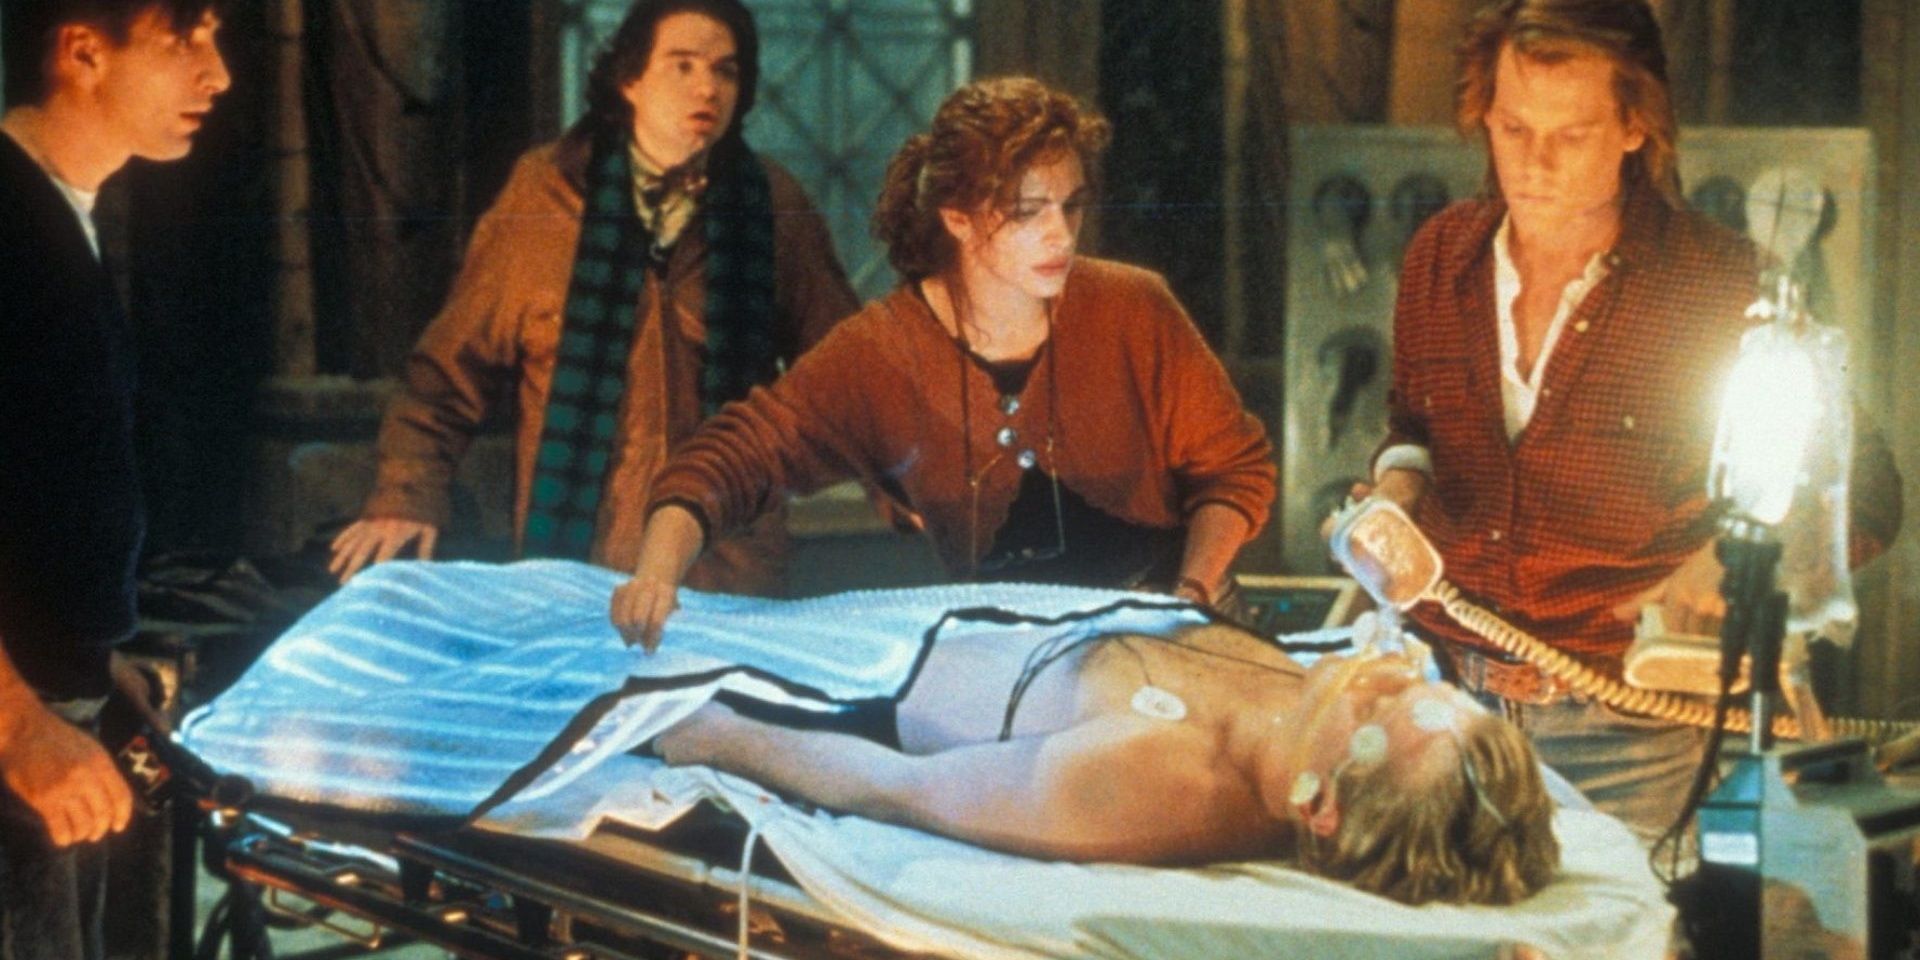 Characters in Flatliners performing one of their tests